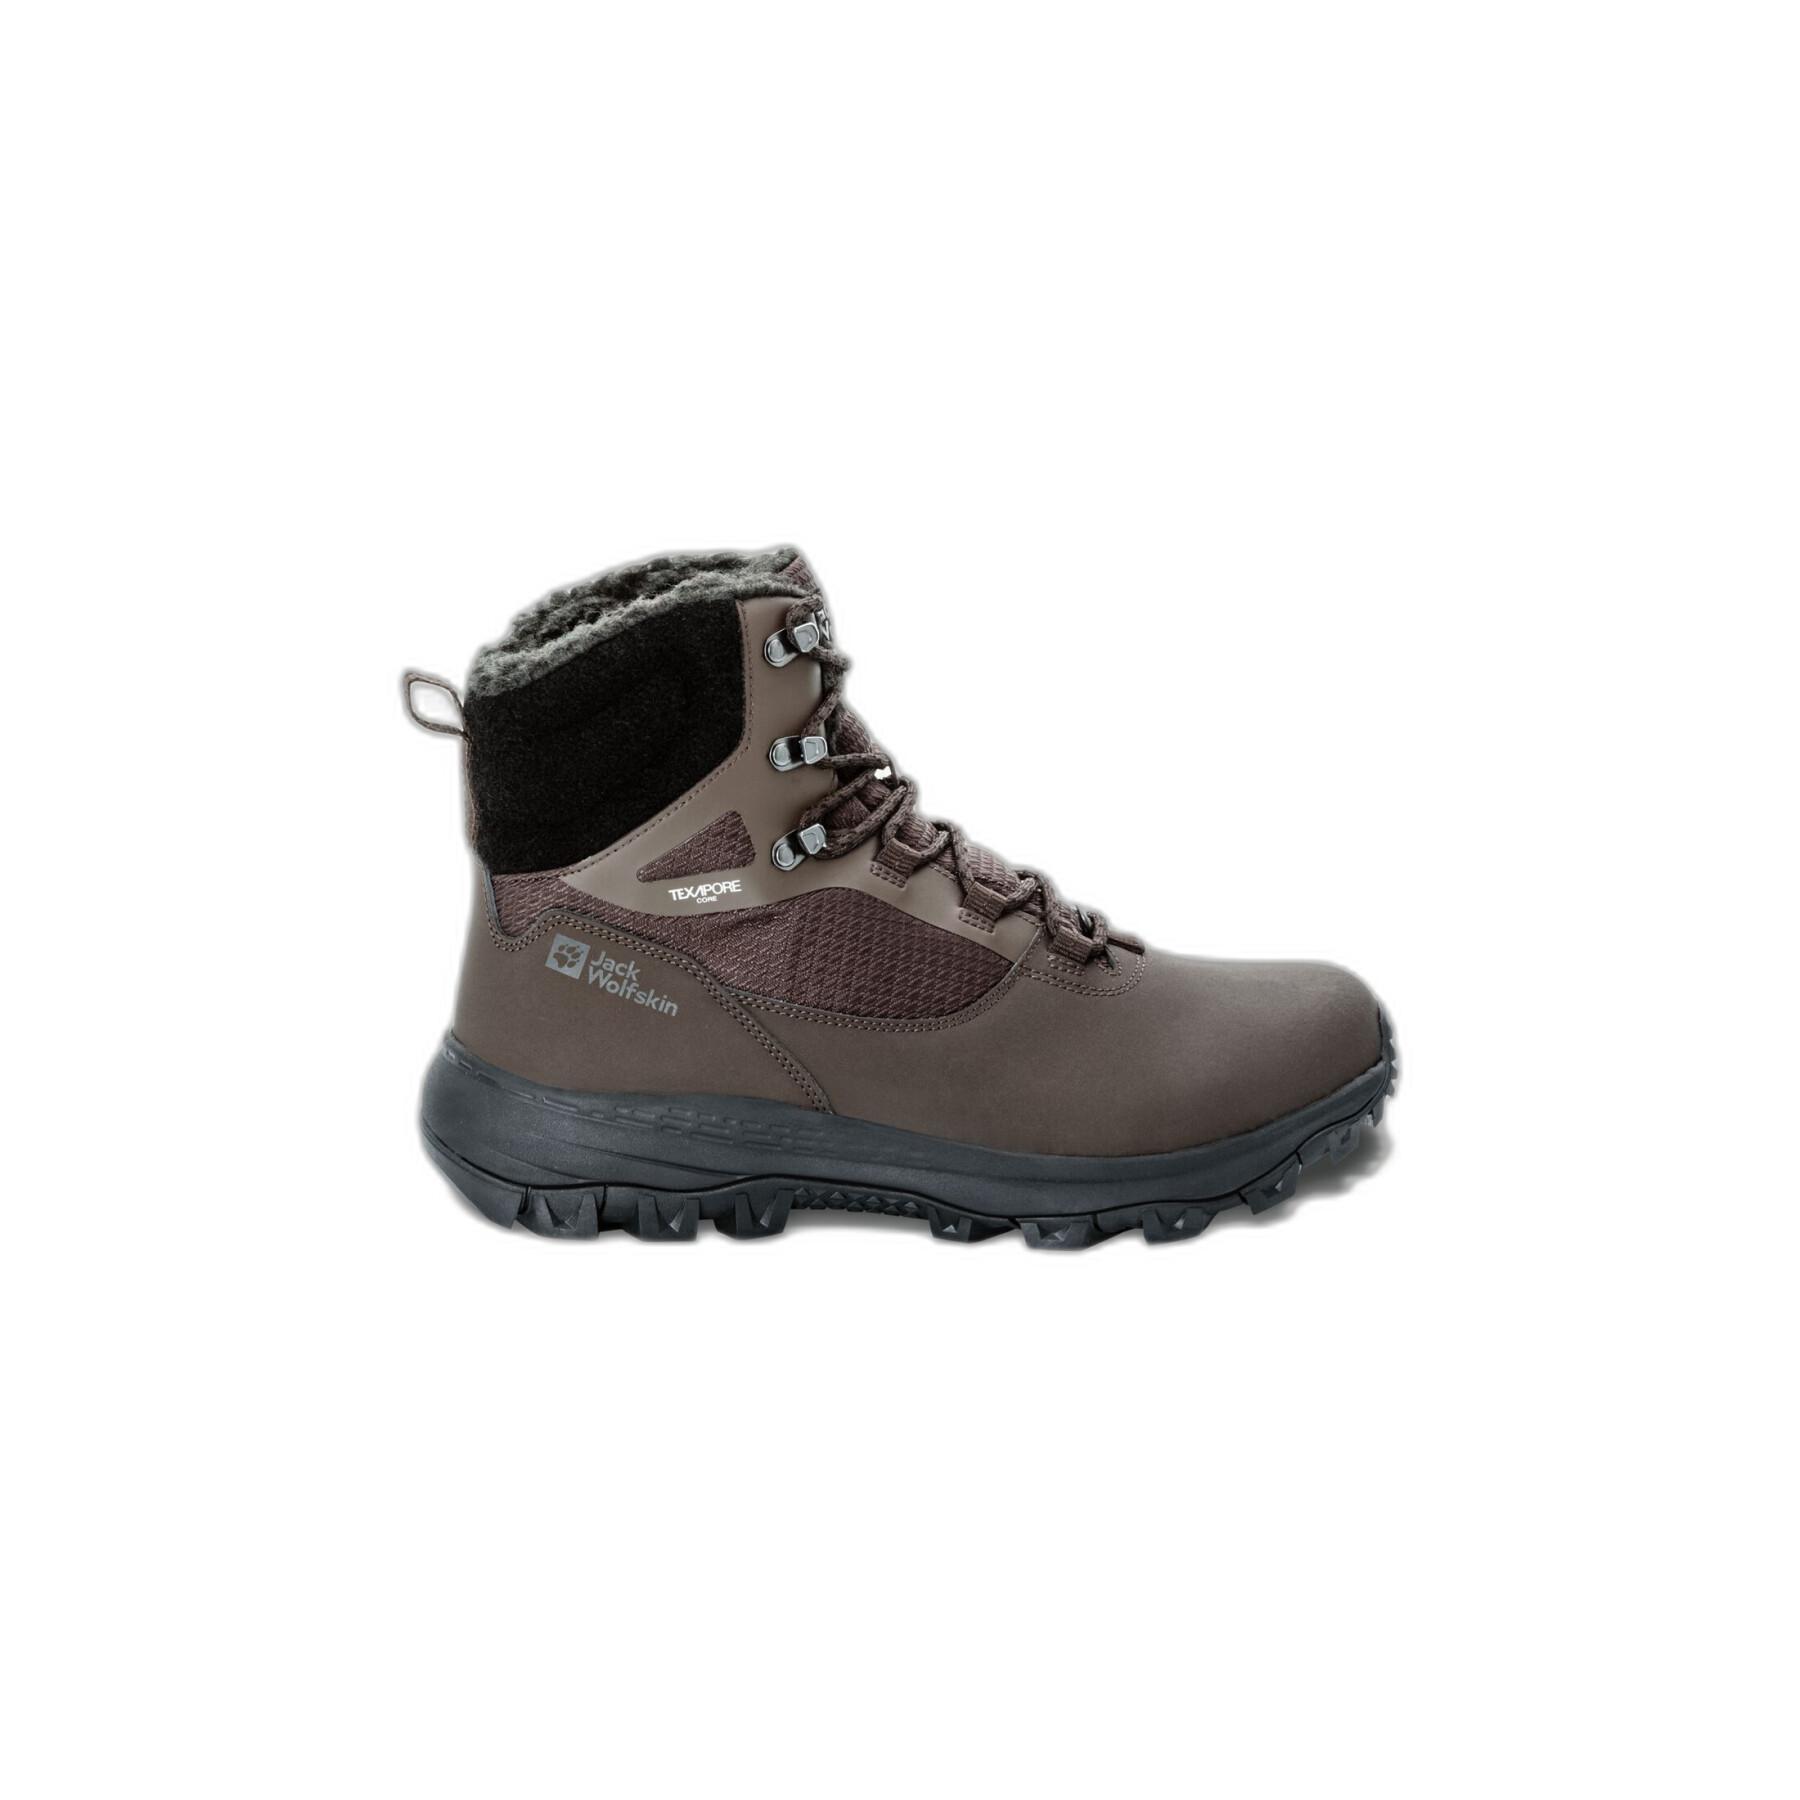 Trail running shoes Jack Wolfskin Everquest Texapore